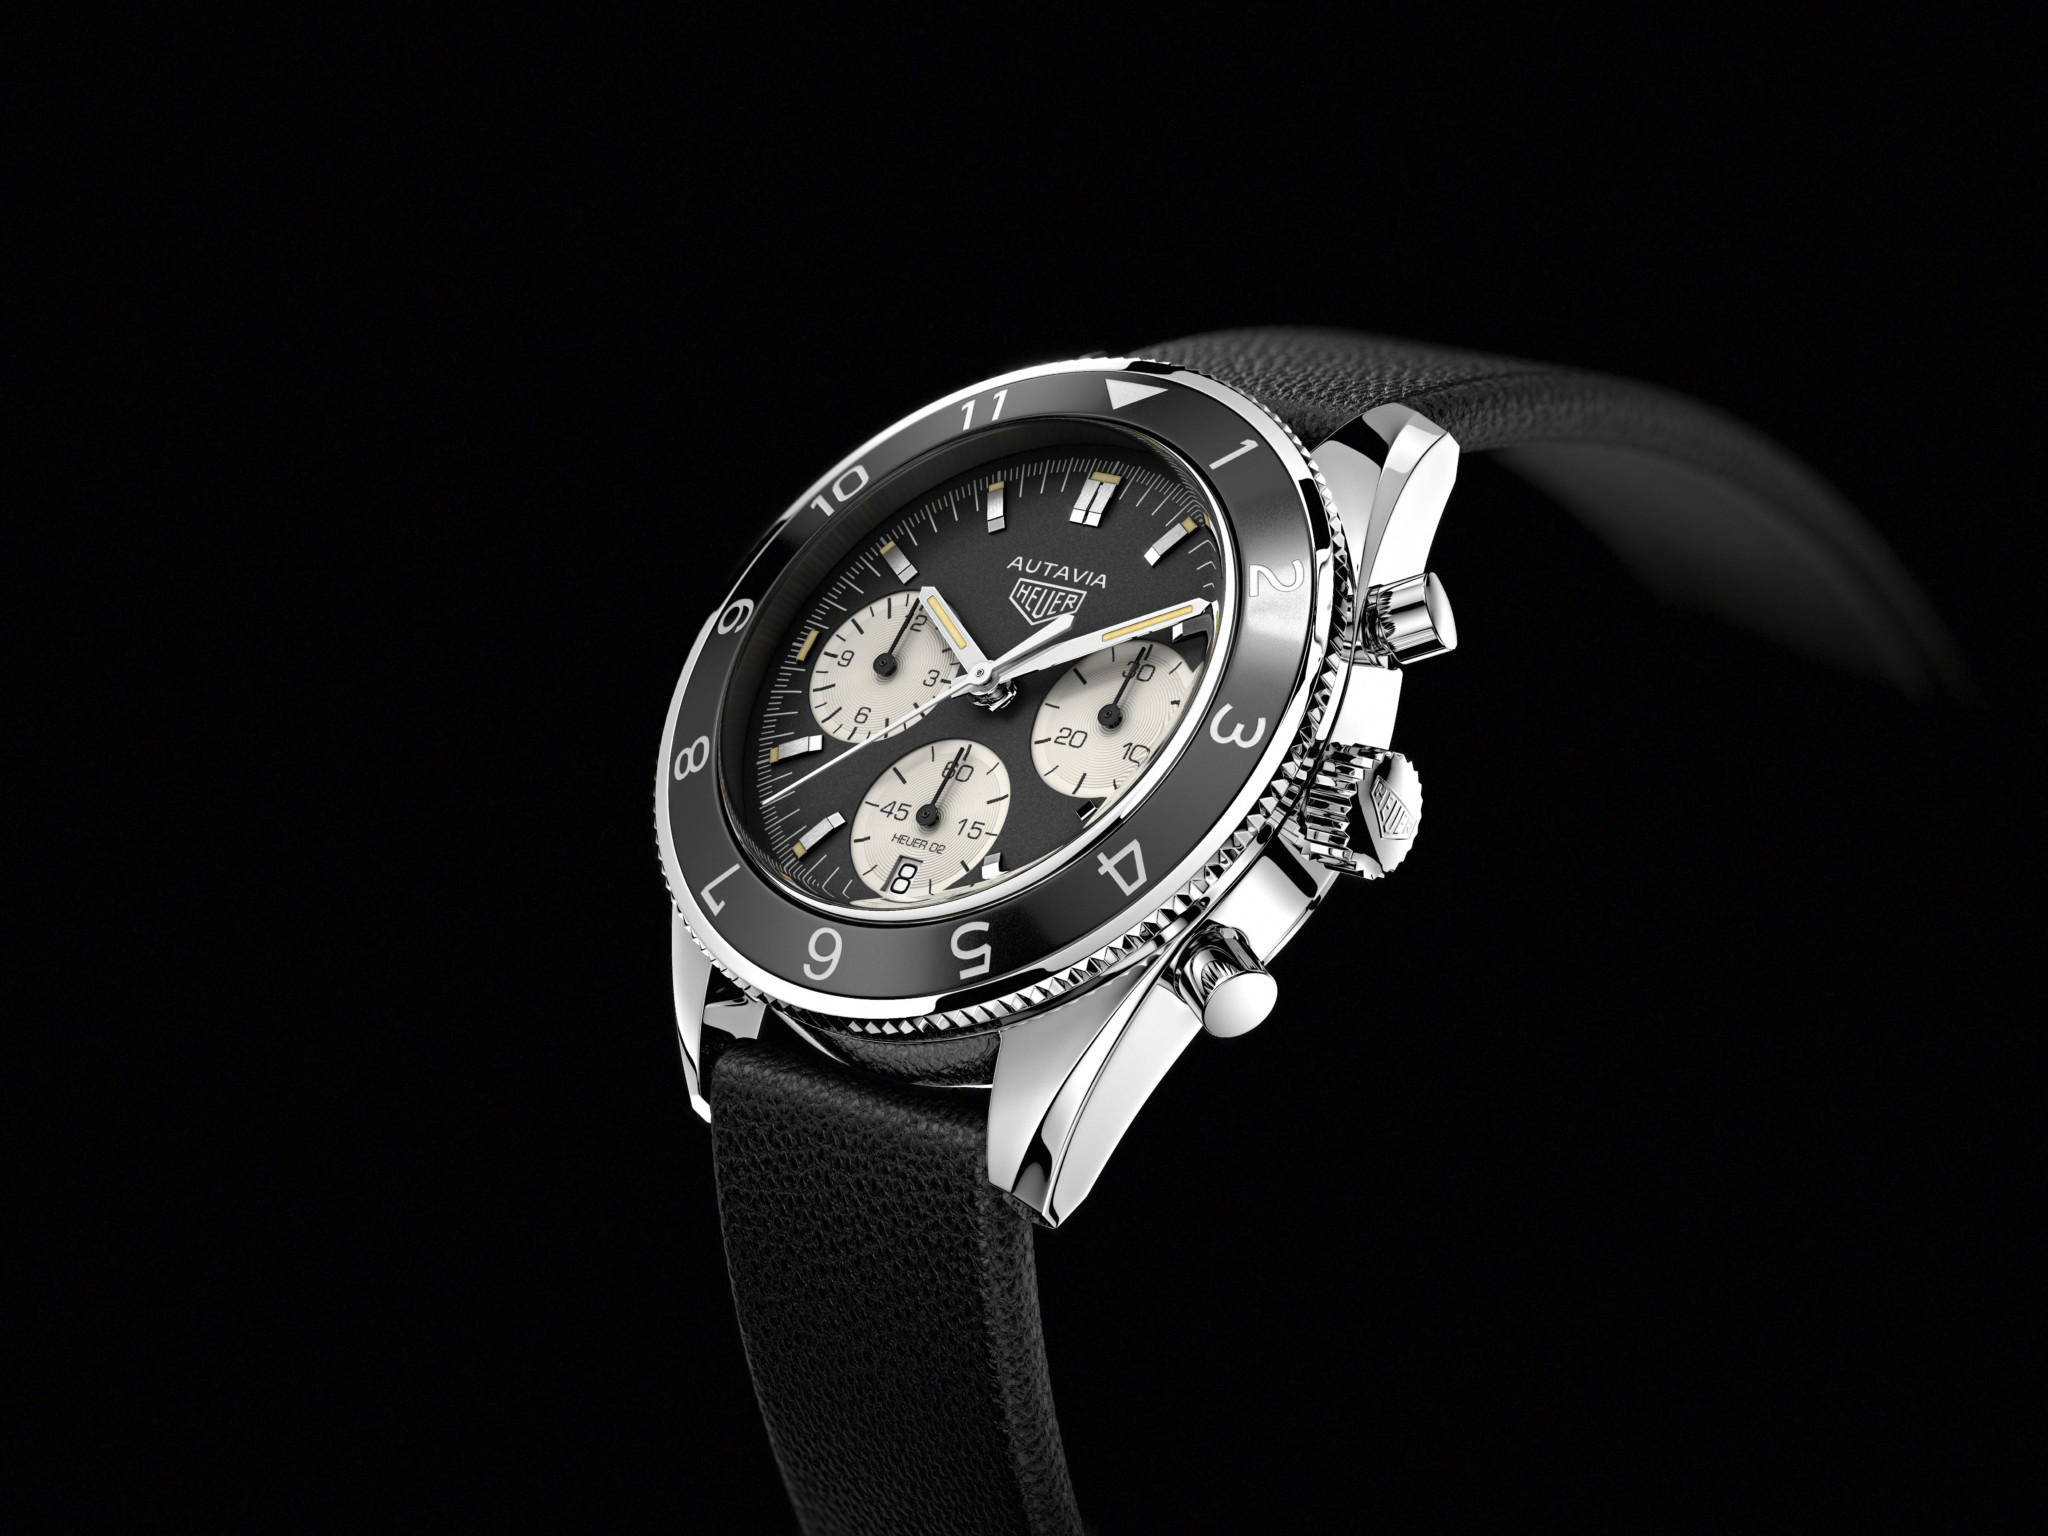 Tag heuer also embraced the vintage vibe with the reissue of its autavia model.